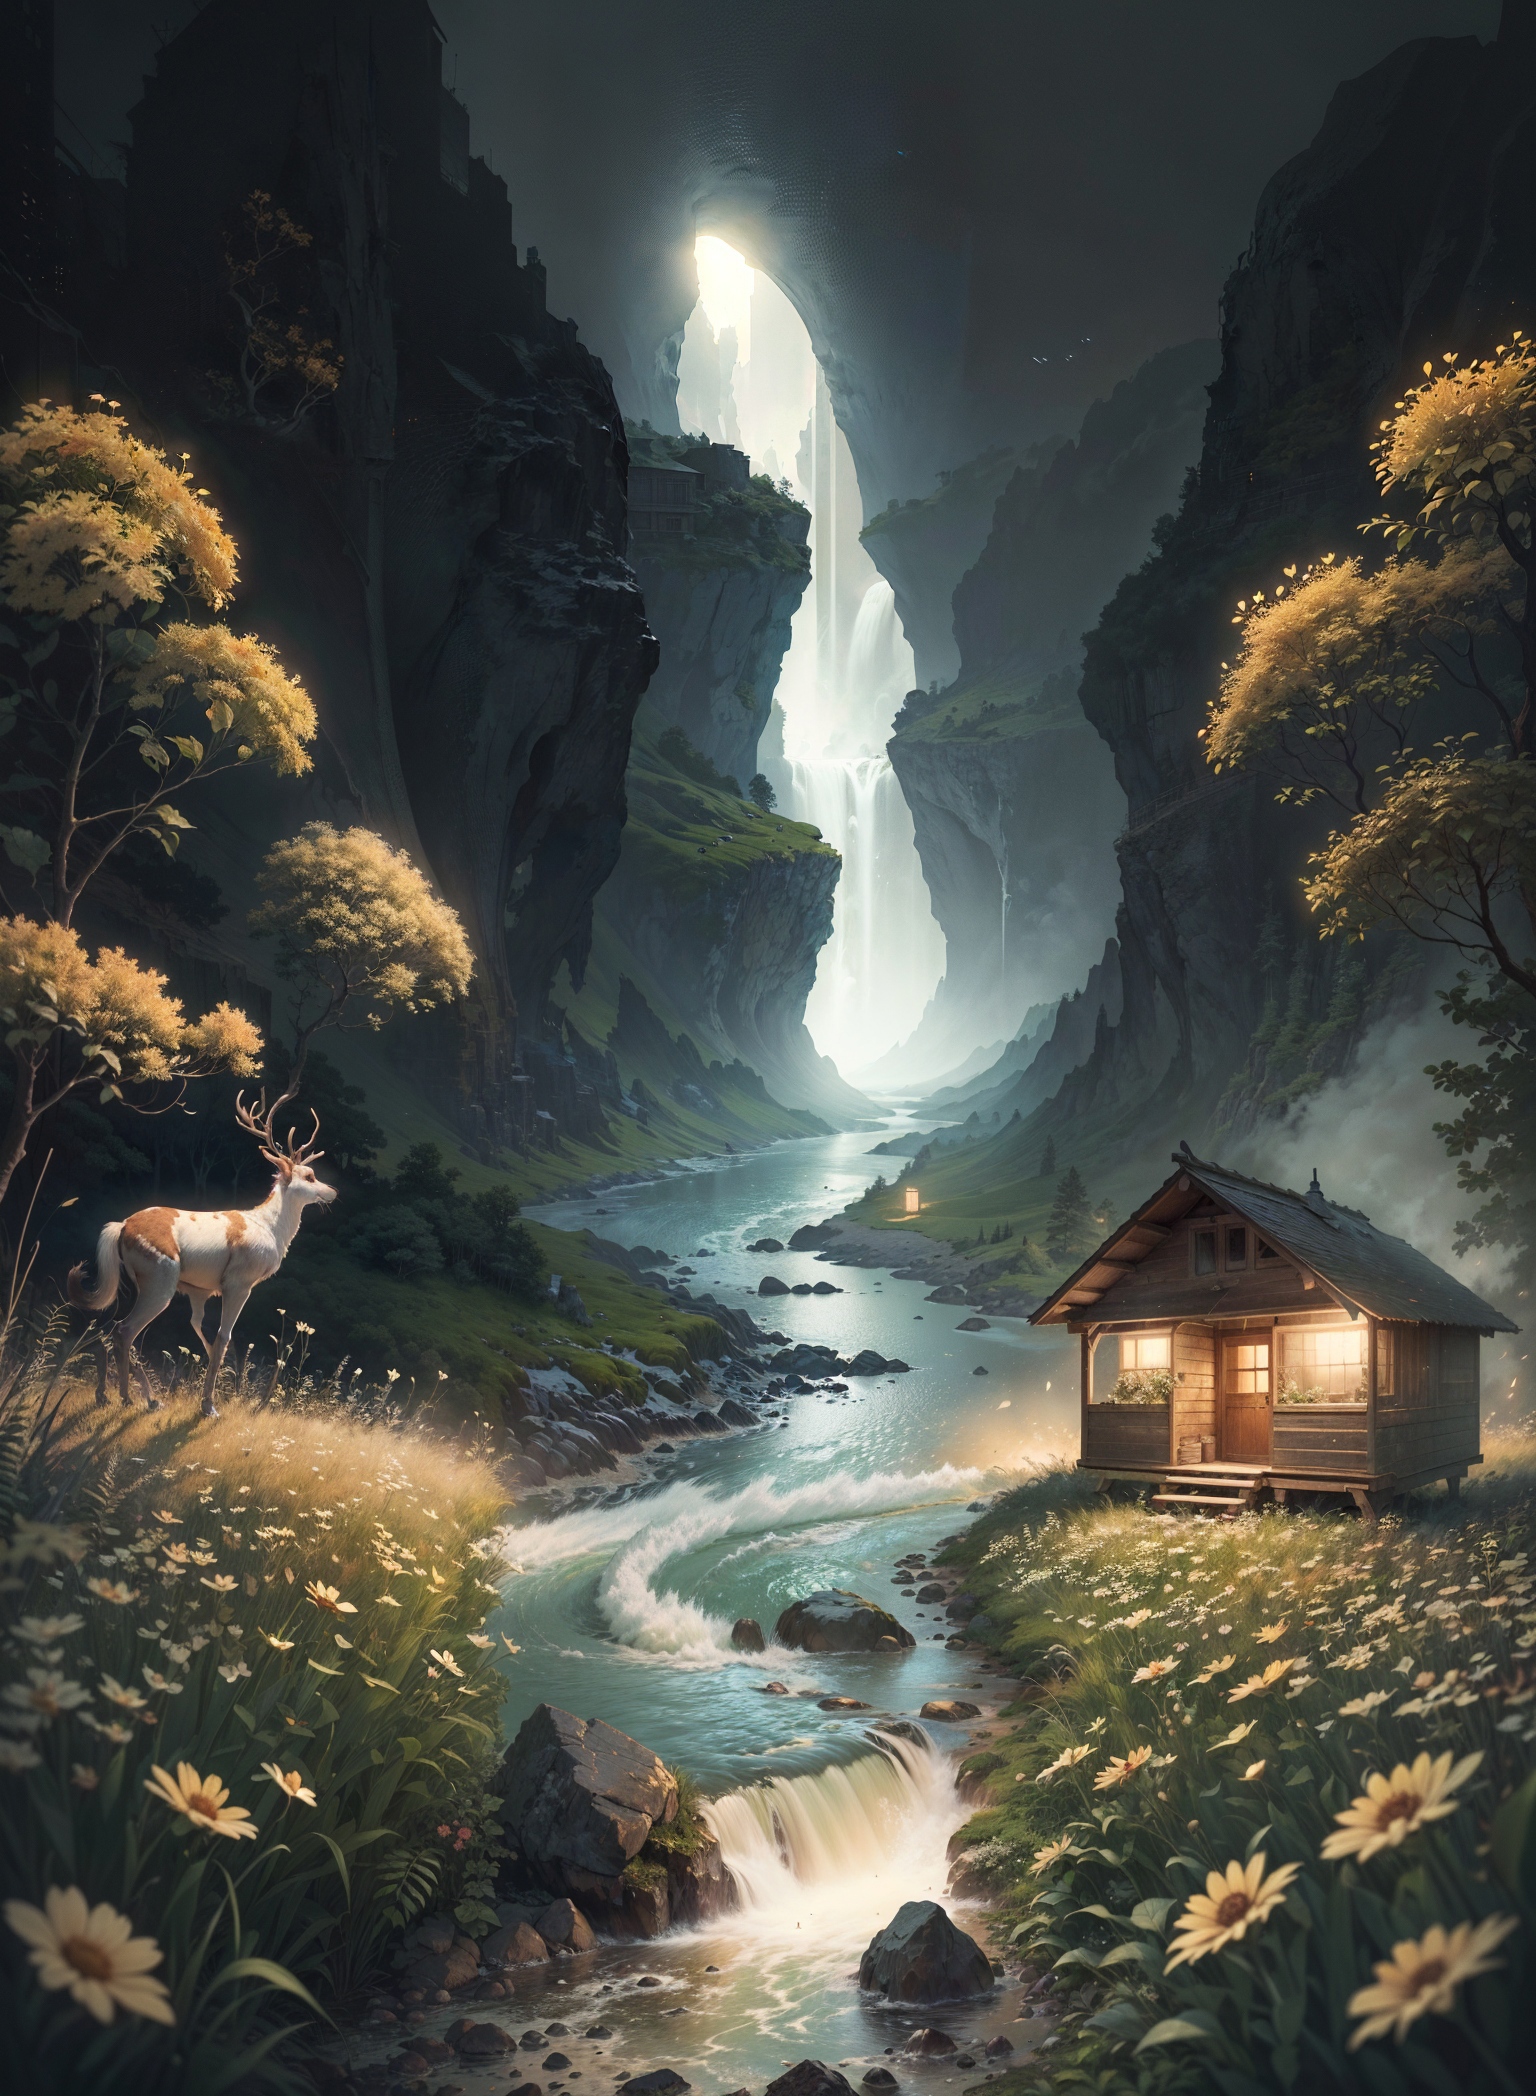 Painting of a house and deer near a river and waterfall.